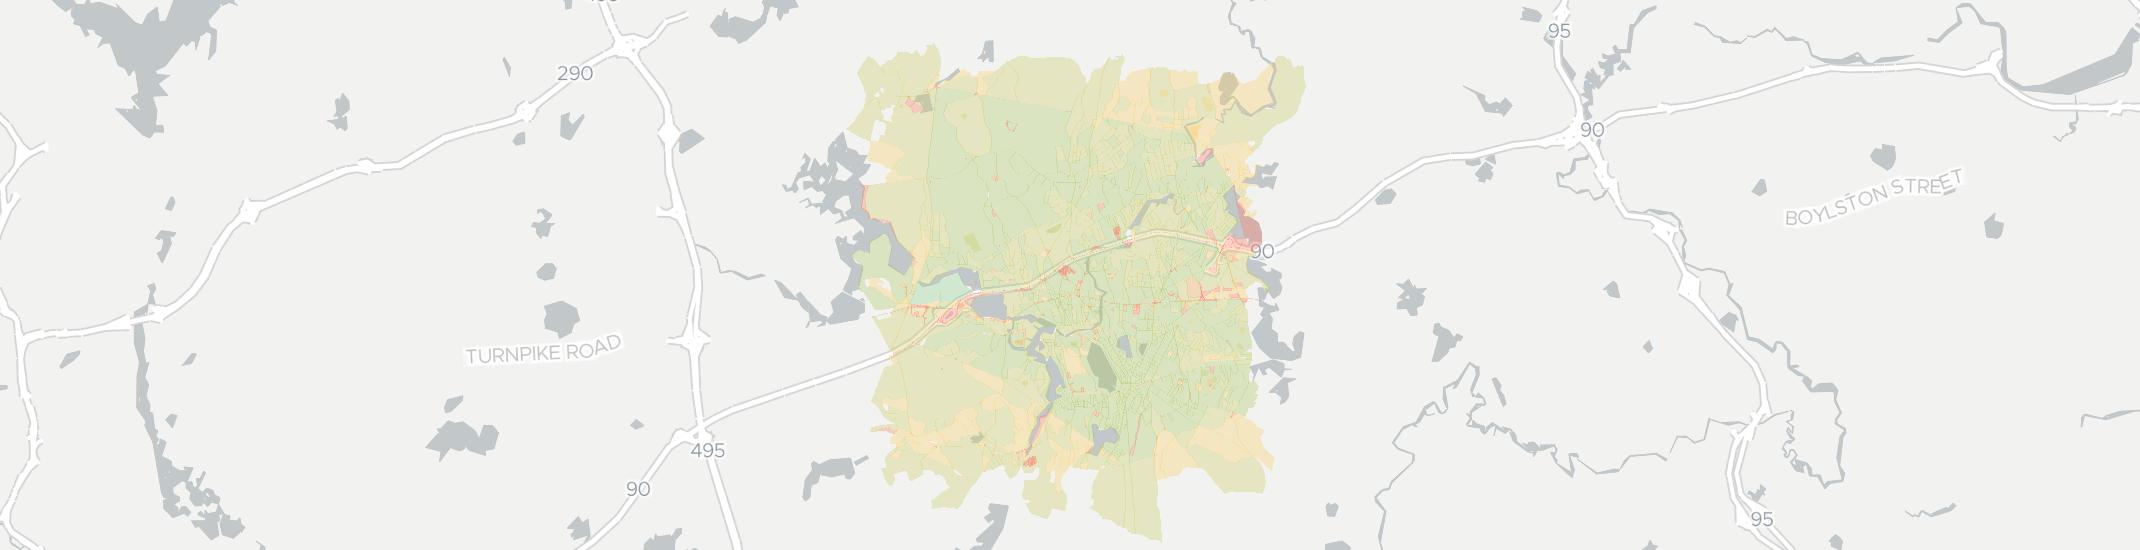 Framingham Internet Competition Map. Click for interactive map.